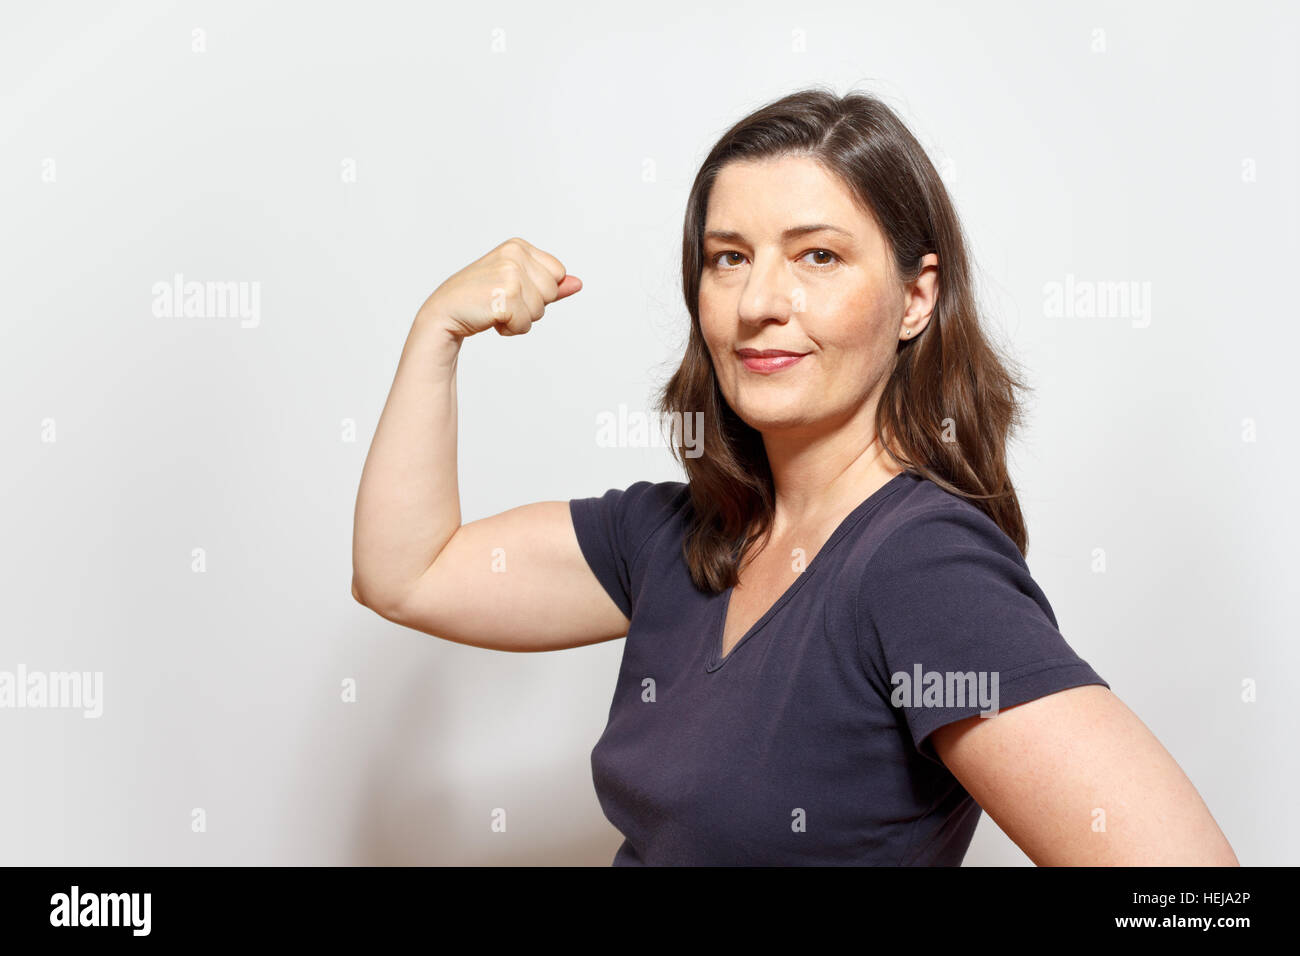 Middle aged woman flexing her biceps muscles, showing self-confidence and pride, white background, copy or text space, copyspace Stock Photo